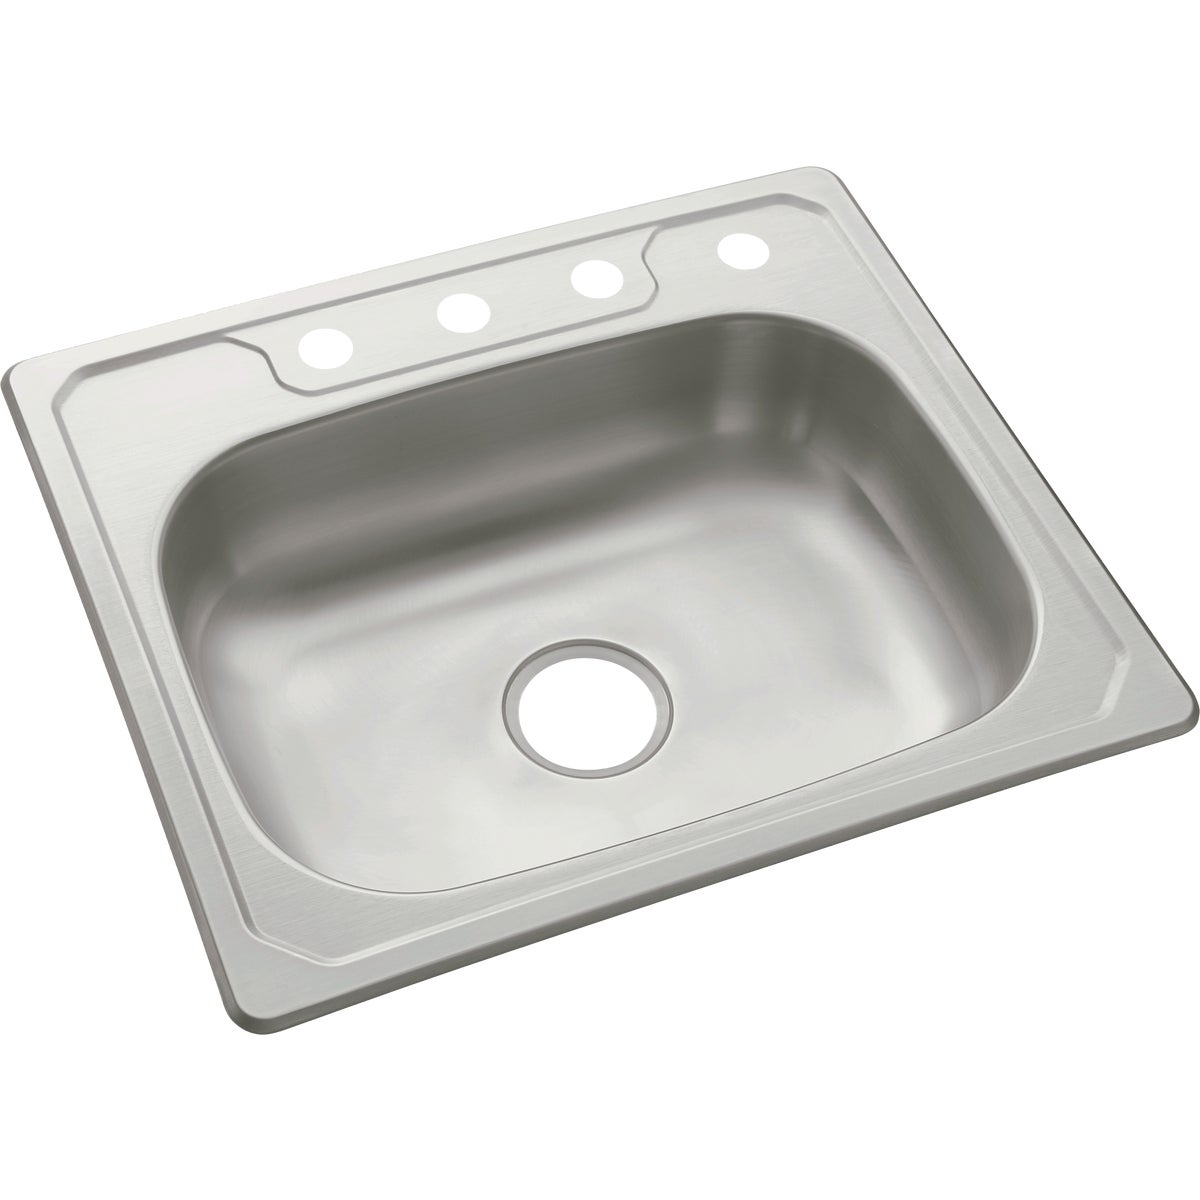 Sterling Middleton Single Bowl 25 In. x 22 In. x 6 In. Deep Stainless Steel Top Mount Kitchen Sink